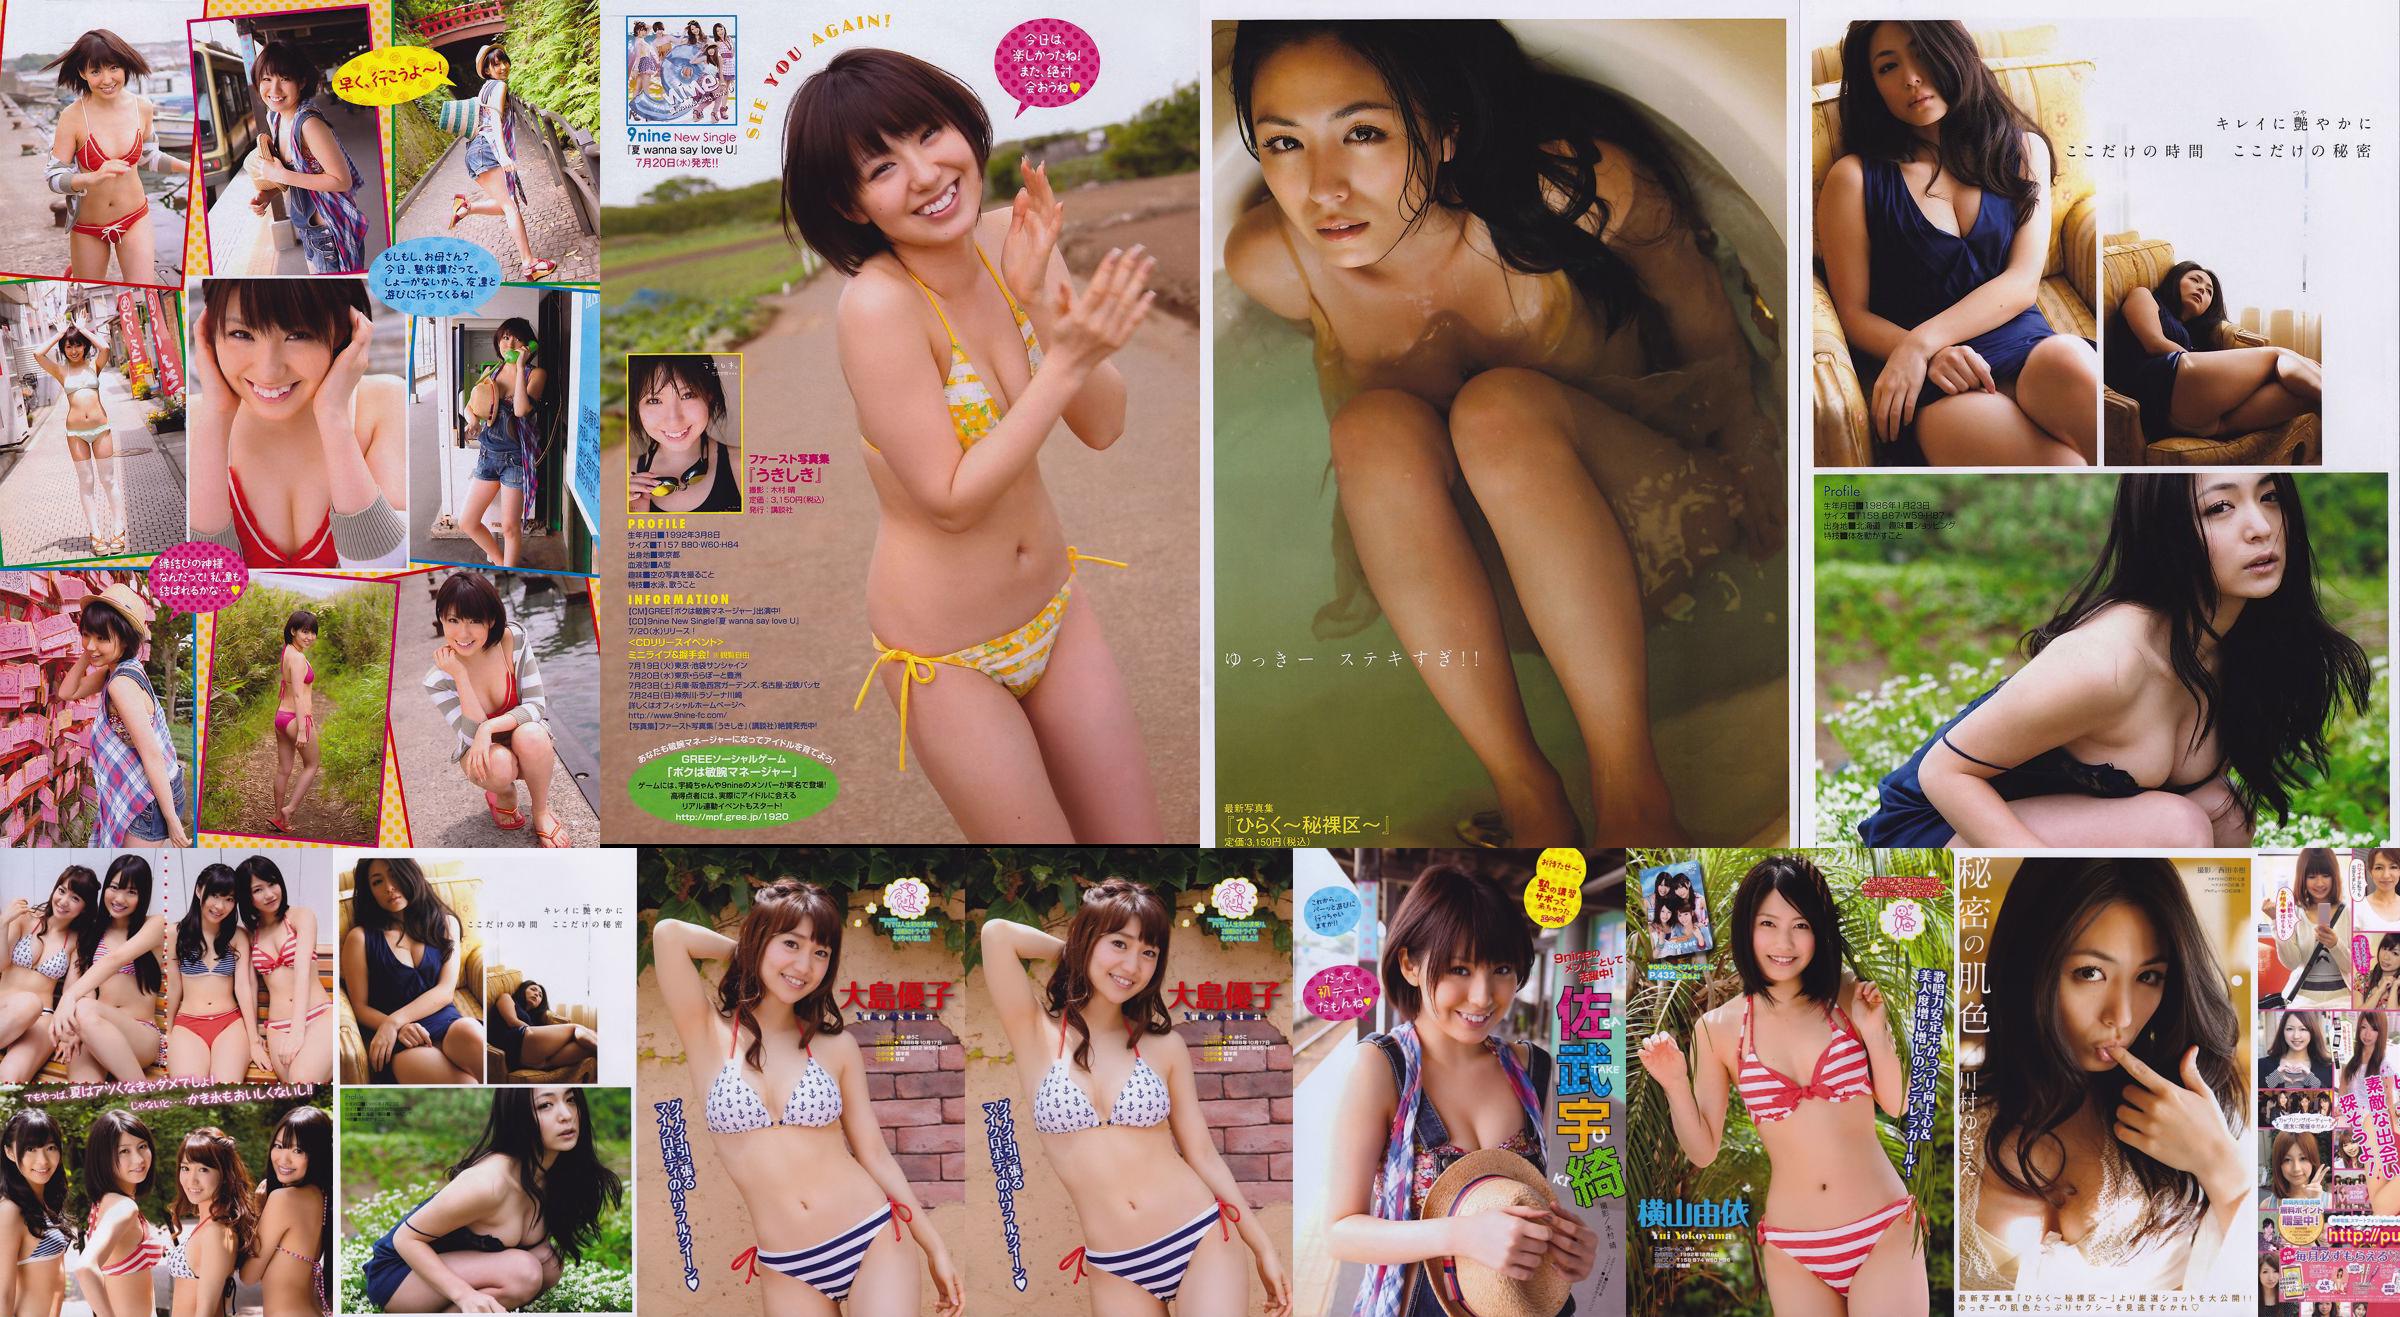 [Young Magazine] Not yet 川村ゆきえ 佐武宇綺 2011年No.32 写真杂志 No.6d25d0 第1页